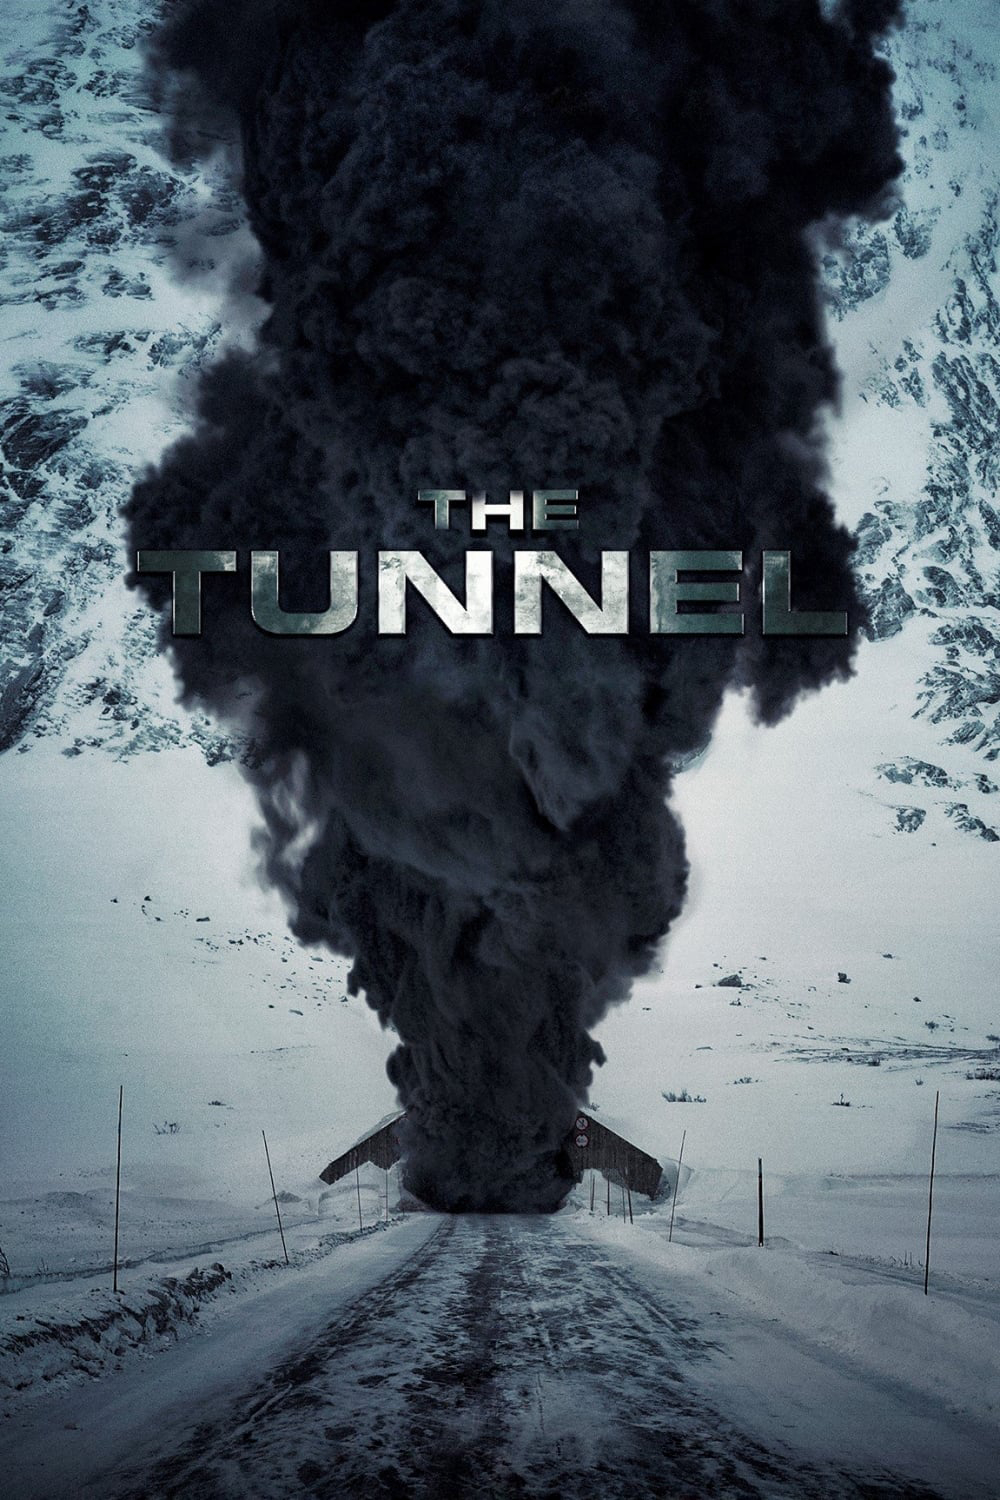 The Tunnel - The Tunnel